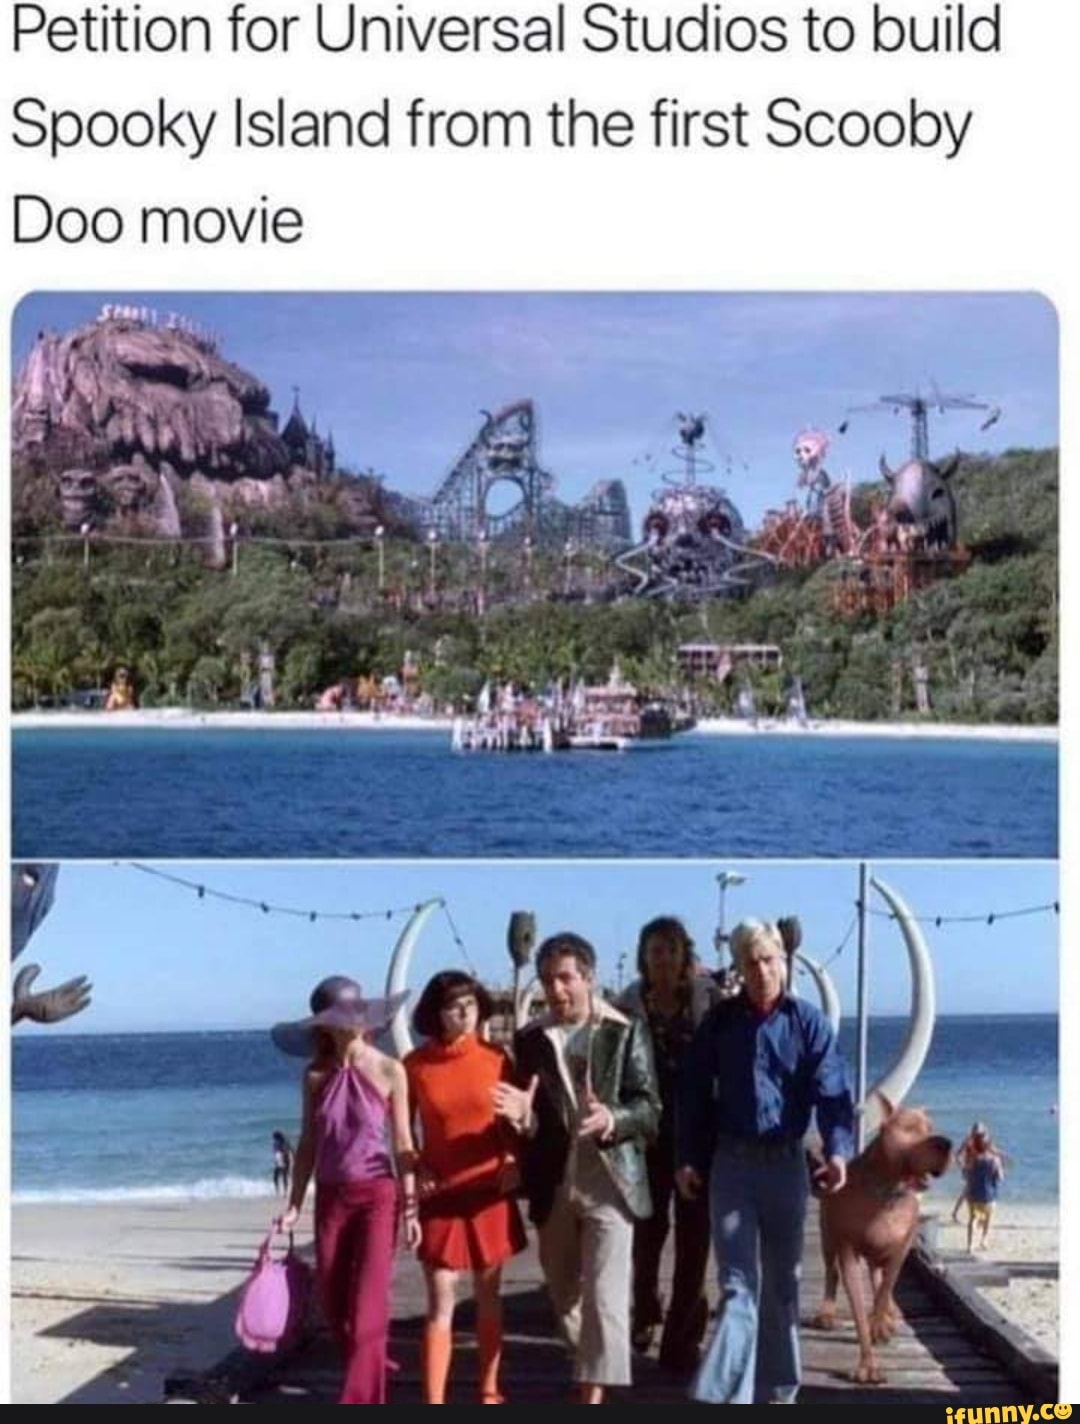 Petition for Universal Studios to build Spooky Island from the first